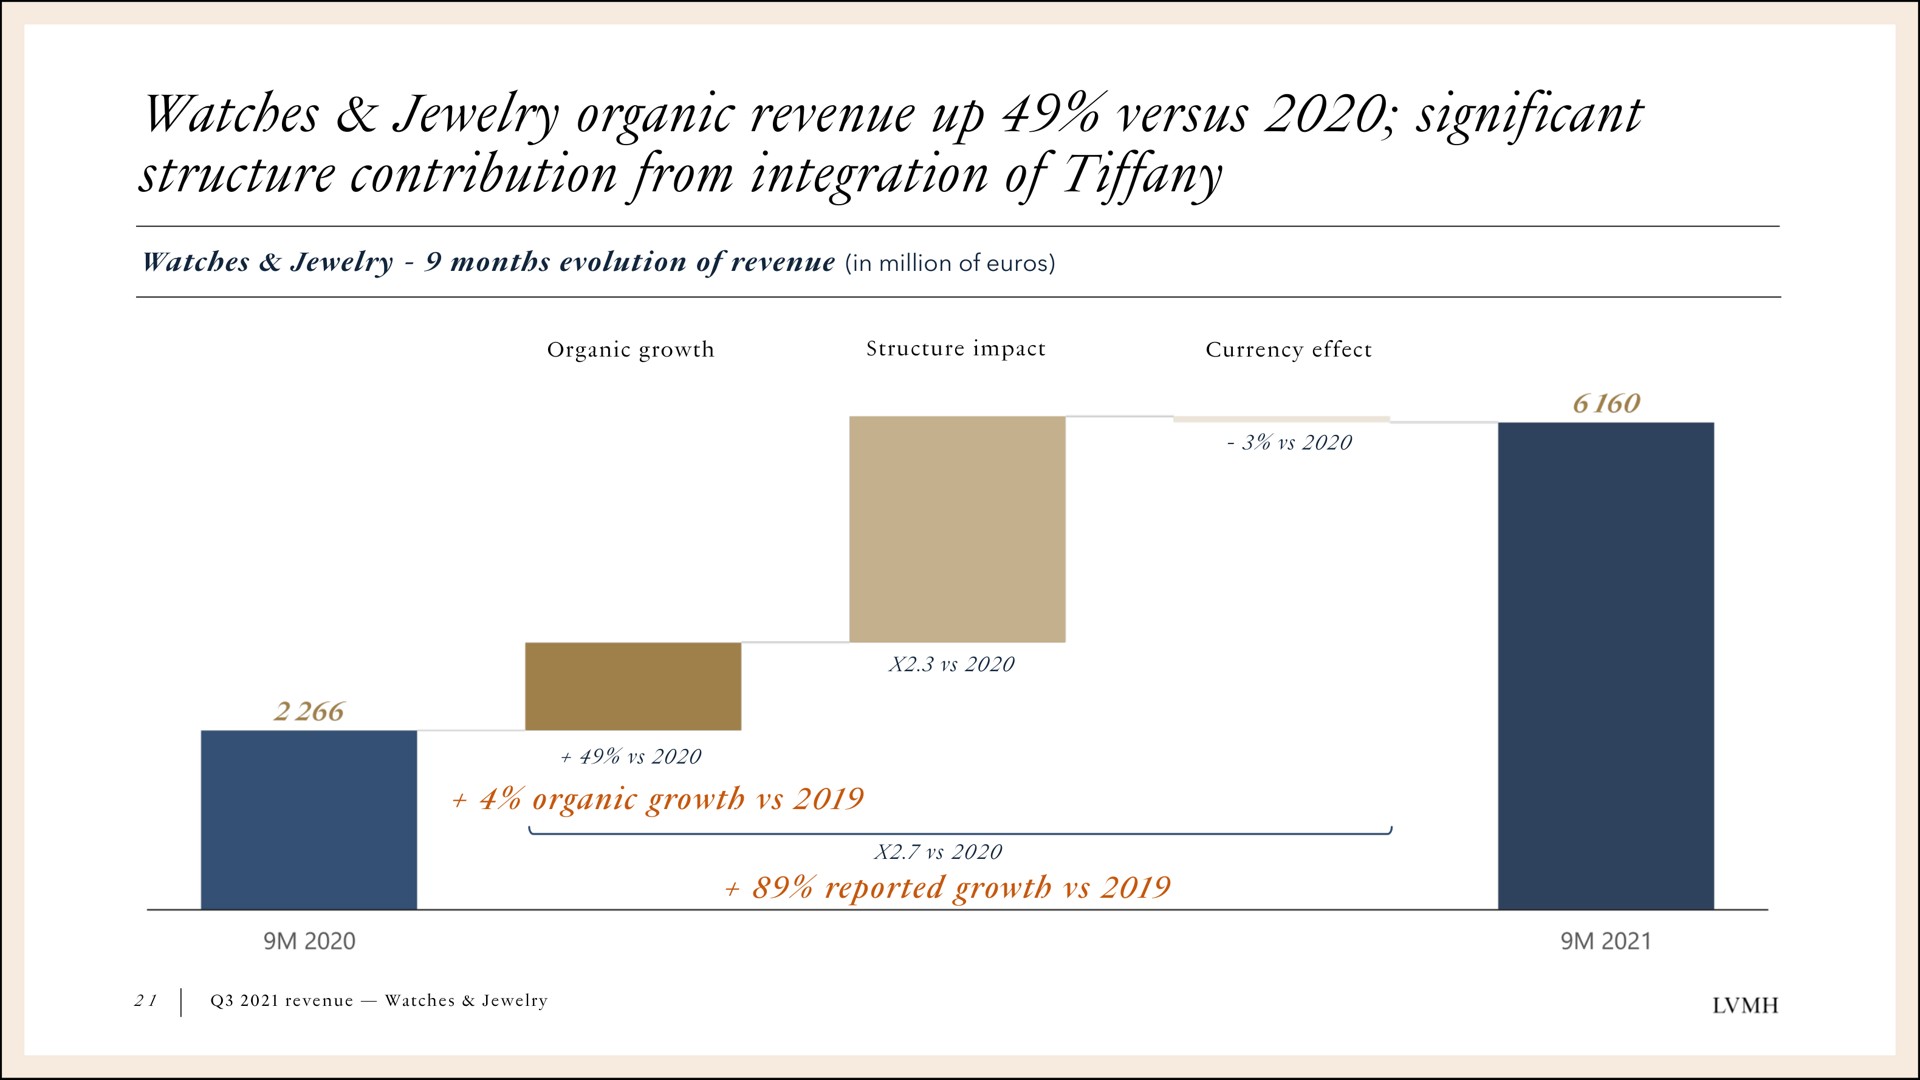 watches jewelry organic revenue up versus significant structure contribution from integration of tiffany | LVMH